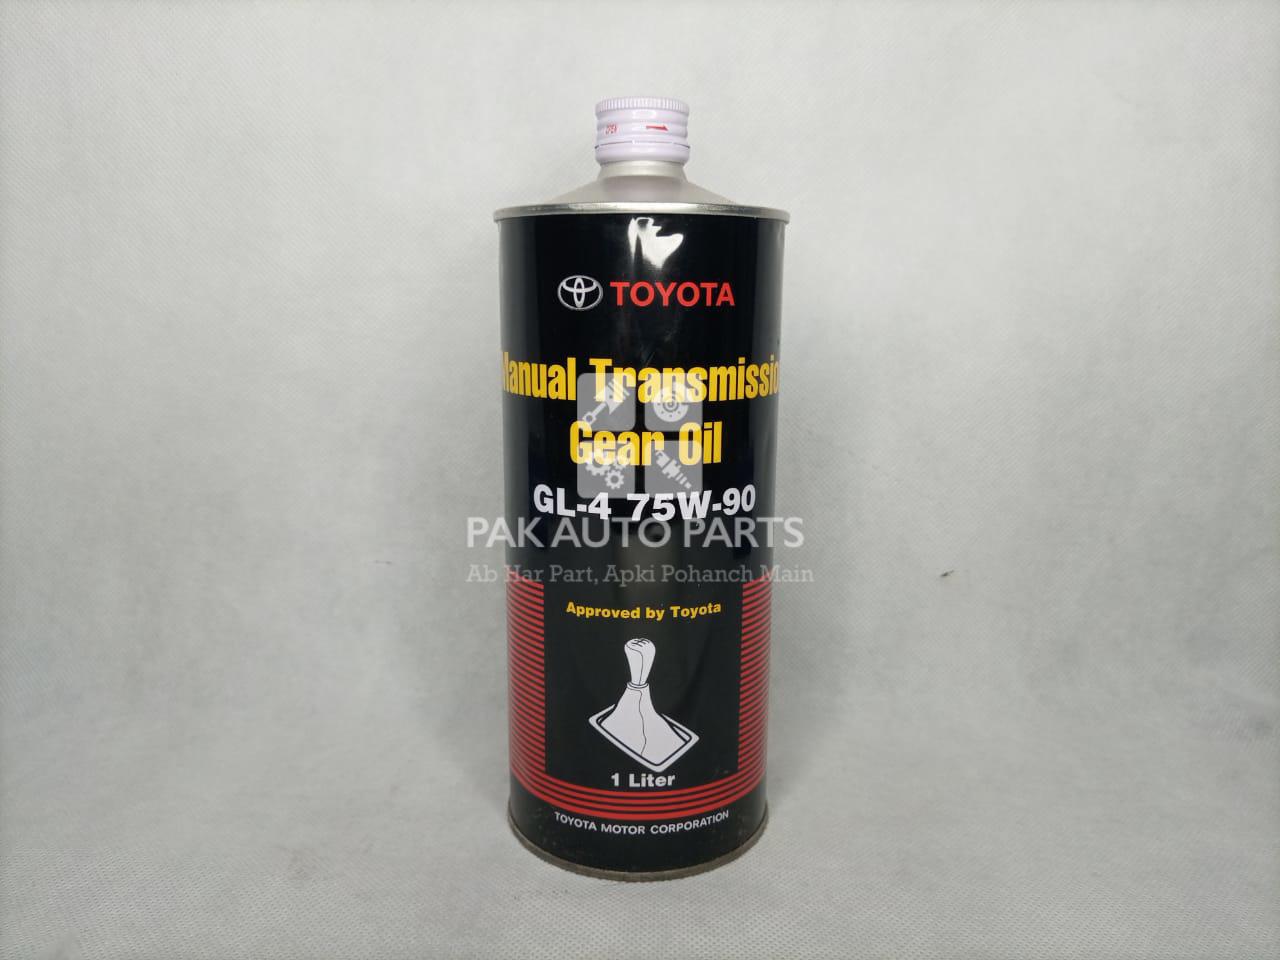 Picture of Toyota Manual Transmission Gear Oil (GL-4 75W-90) 1liter